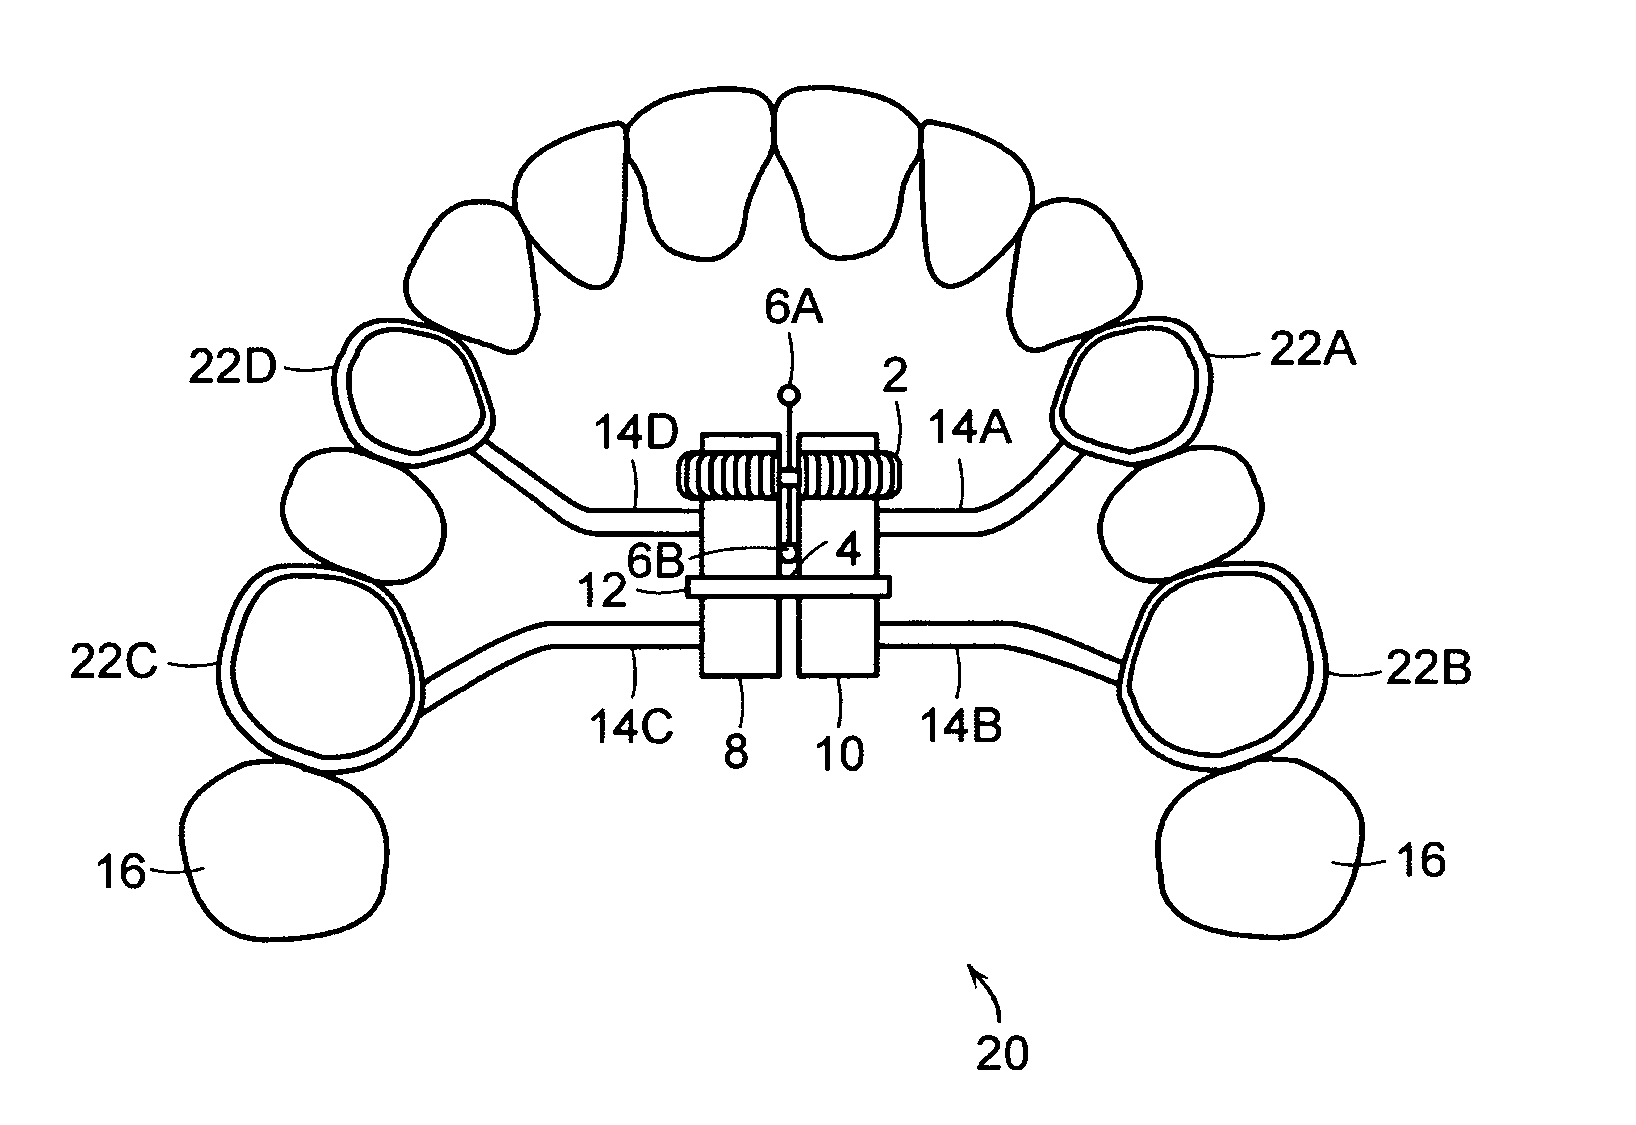 Palatal expansion device and methods